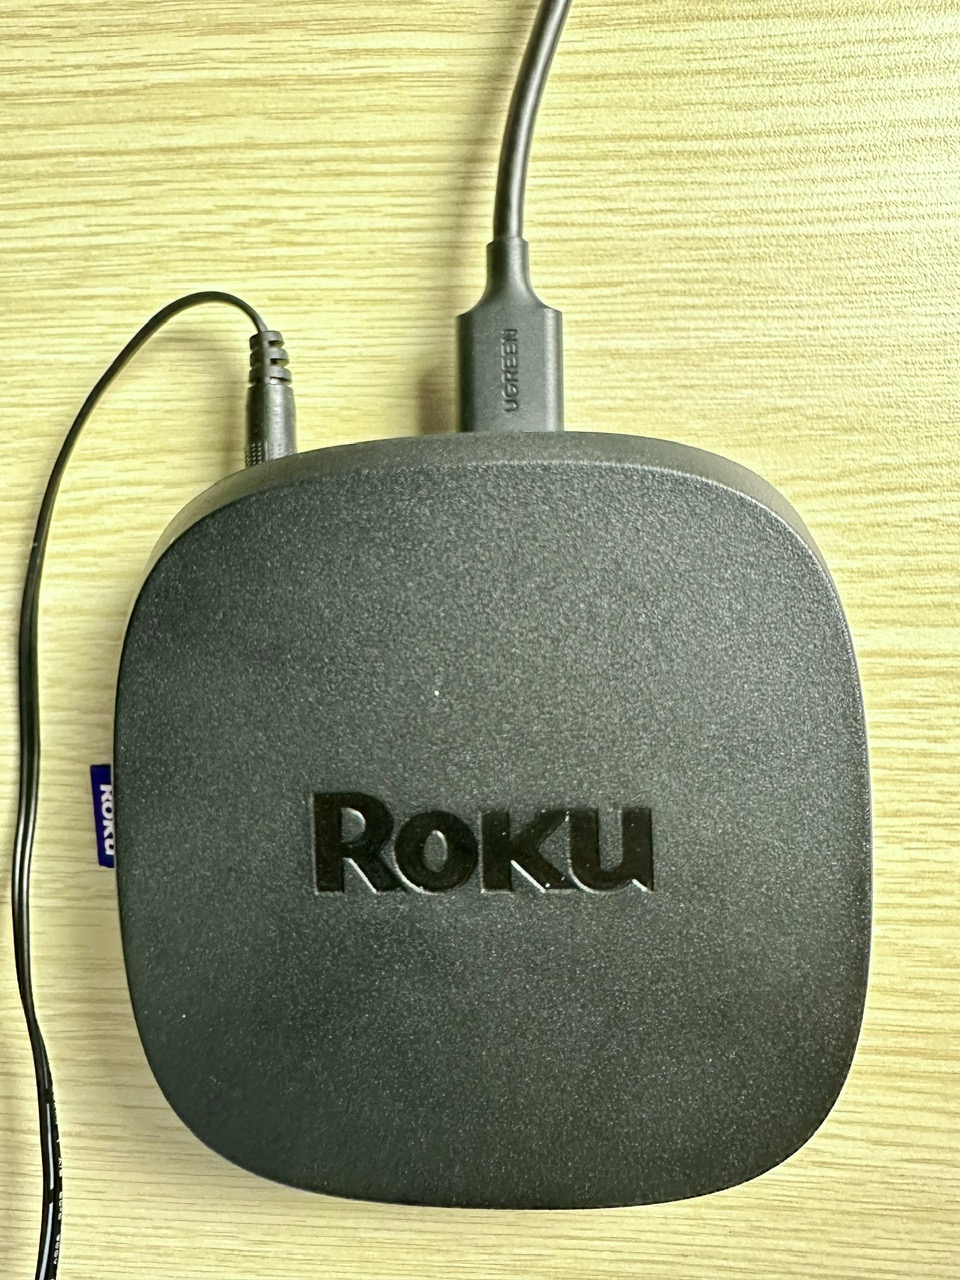 a roku is connected to an hdmi cable